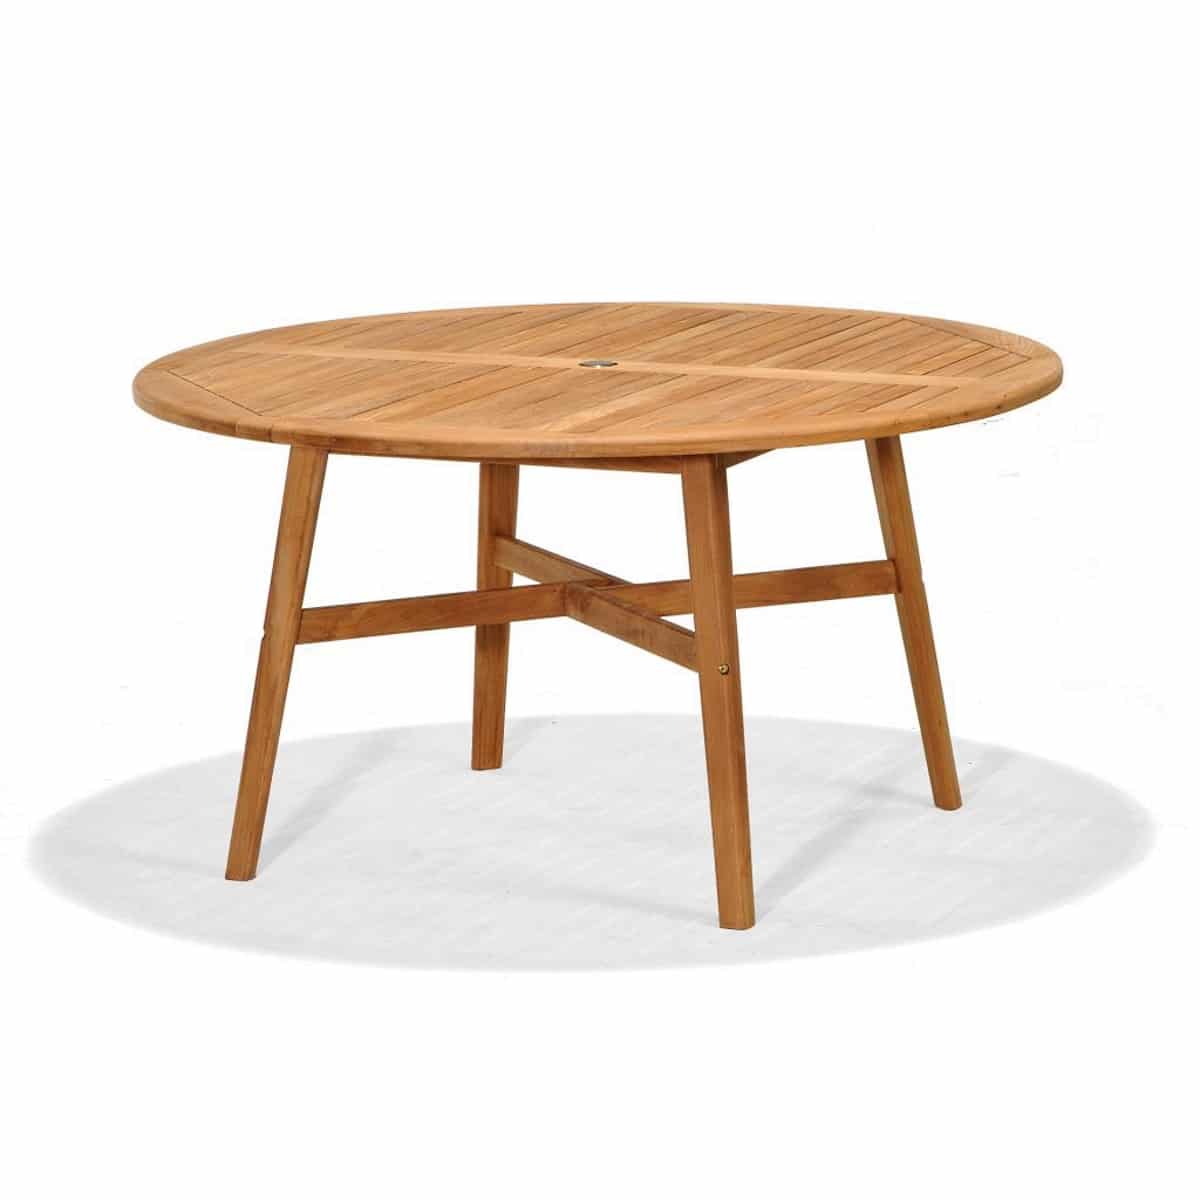 Forever Patio Universal Teak 55" Round Dining Table FP-UNIT-2030-DT-55-Teak Table Forever Patio 